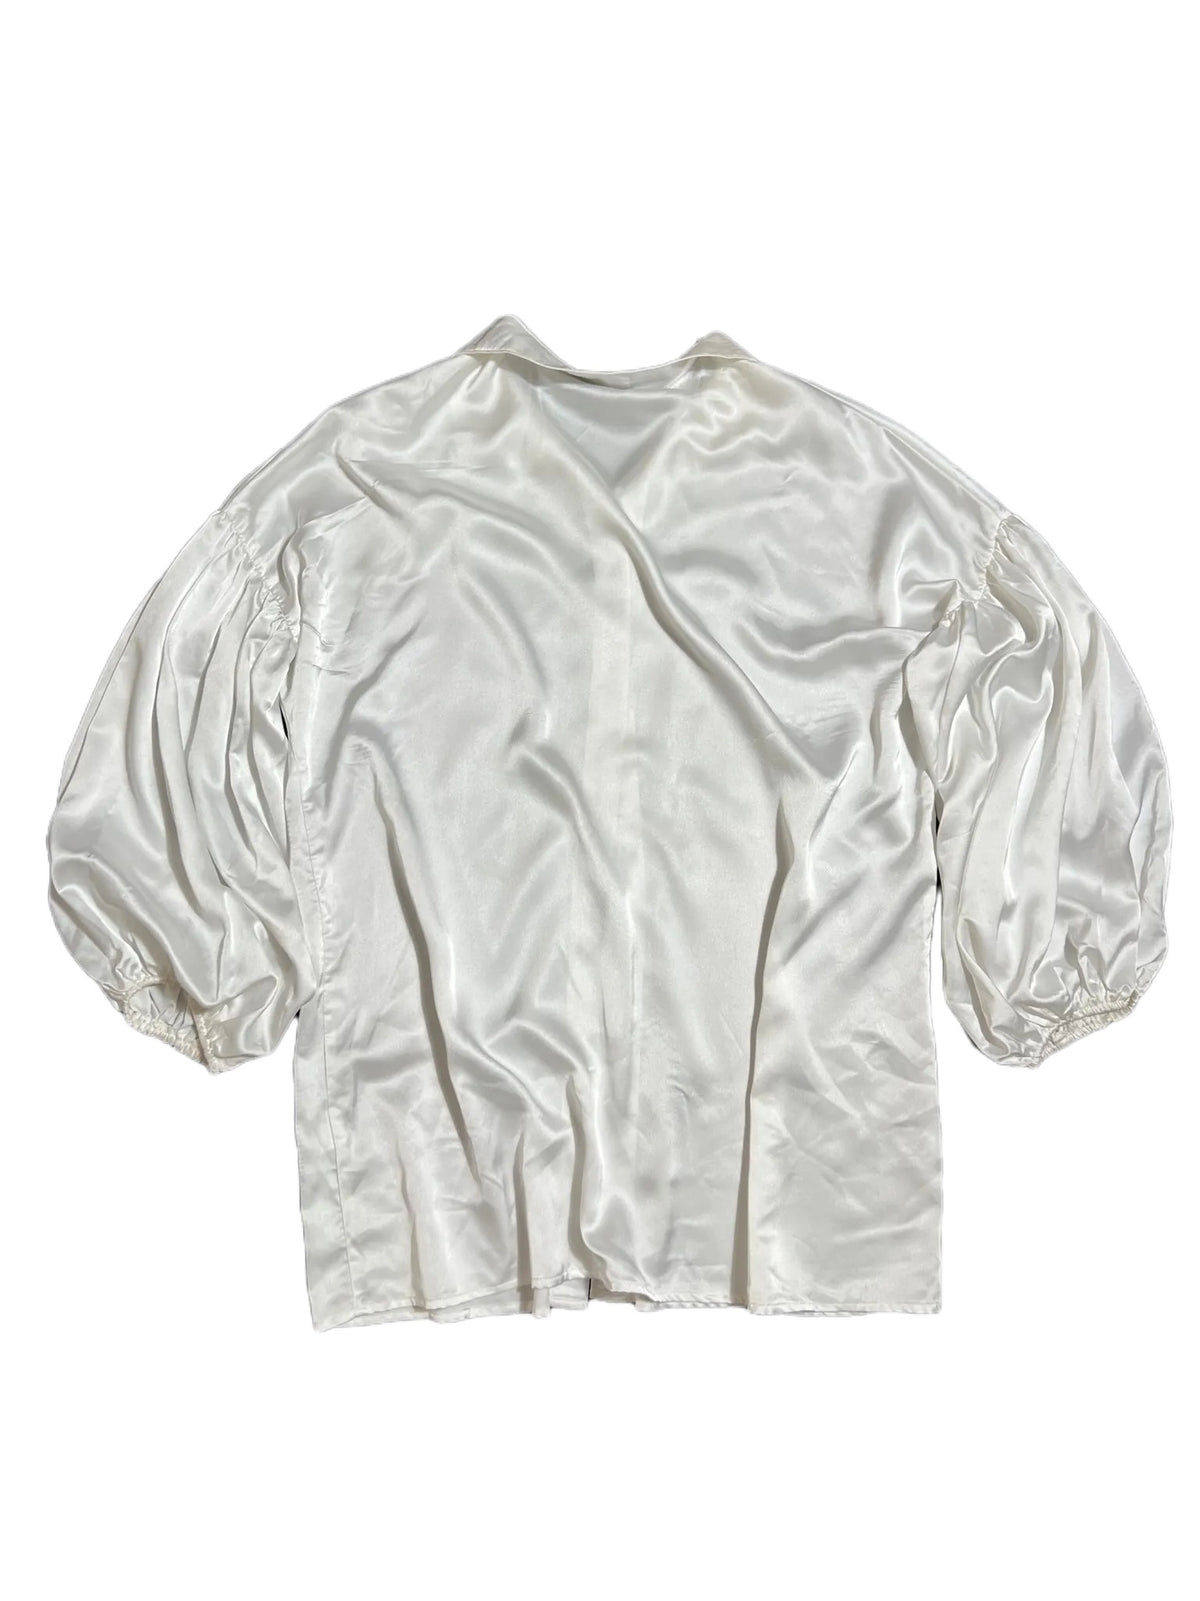 Rumours- White Puff Sleeve Button Up